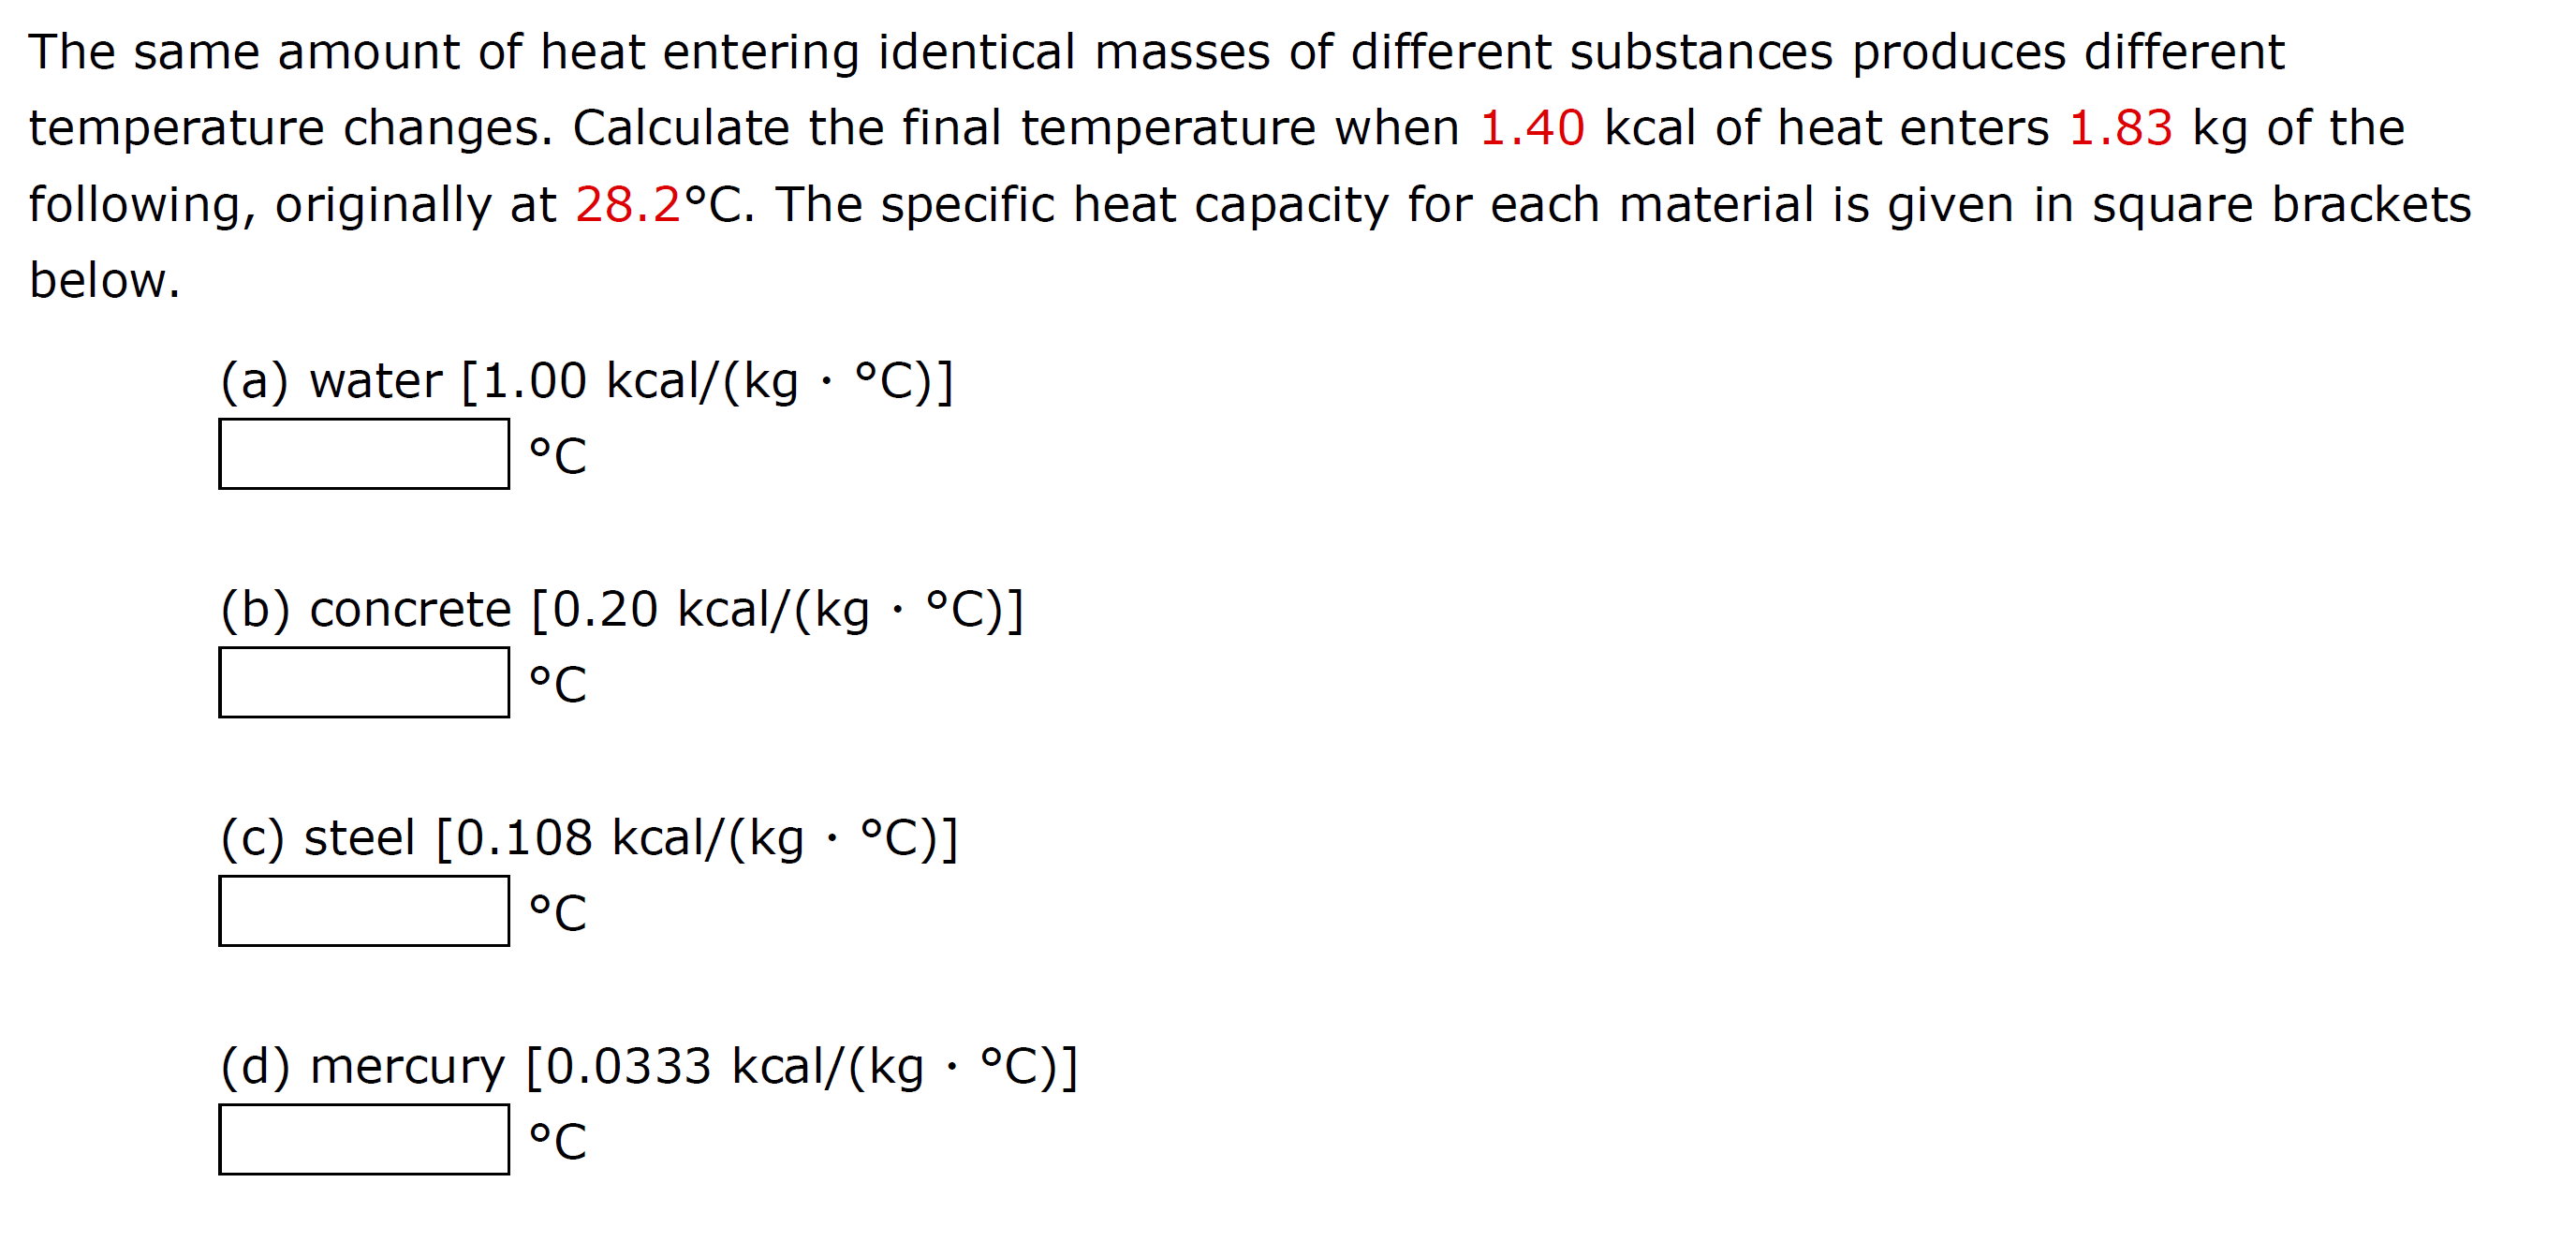 The same amount of heat entering identical masses of different substances produces different
temperature changes. Calculate the final temperature when 1.40 kcal of heat enters 1.83 kg of the
following, originally at 28.2°C. The specific heat capacity for each material is given in square brackets
below.
(a) water [1.00 kcal/(kg · °C)]
°C
(b) concrete [0.20 kcal/(kg · °C)]
°C
(c) steel [0.108 kcal/(kg · °C)]
°C
(d) mercury [0.0333 kcal/(kg · °C)]
°C
